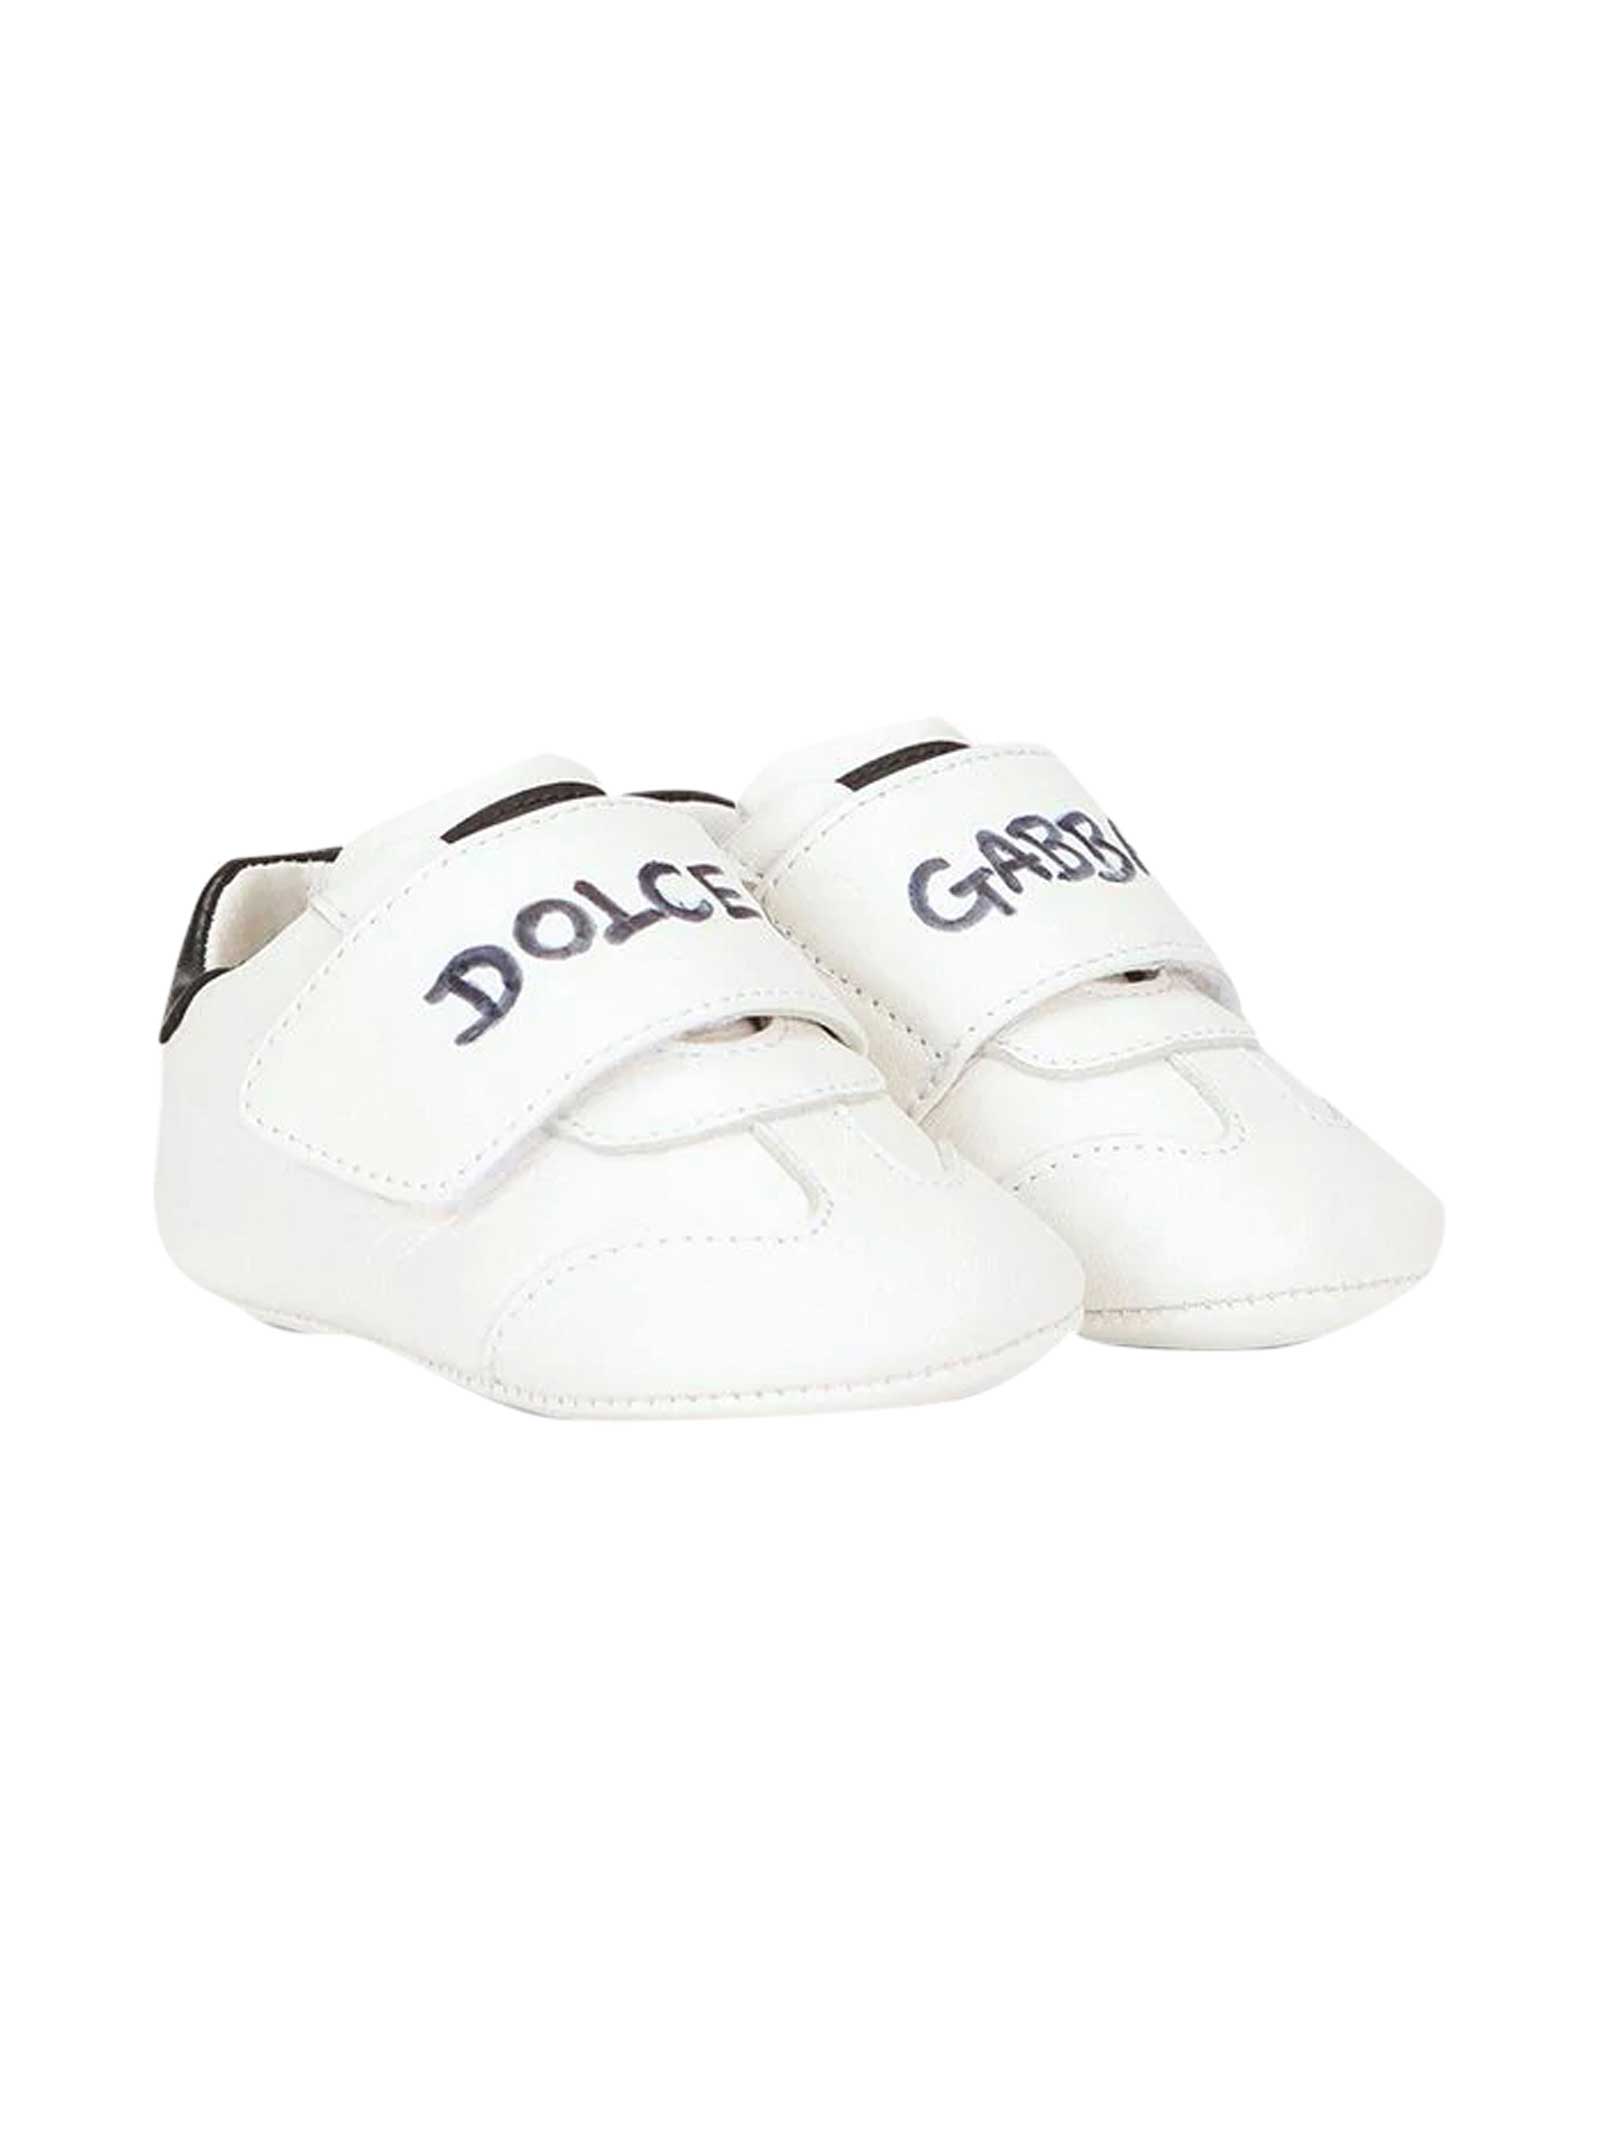 Buy Dolce & Gabbana White Sneakers online, shop Dolce & Gabbana shoes with free shipping